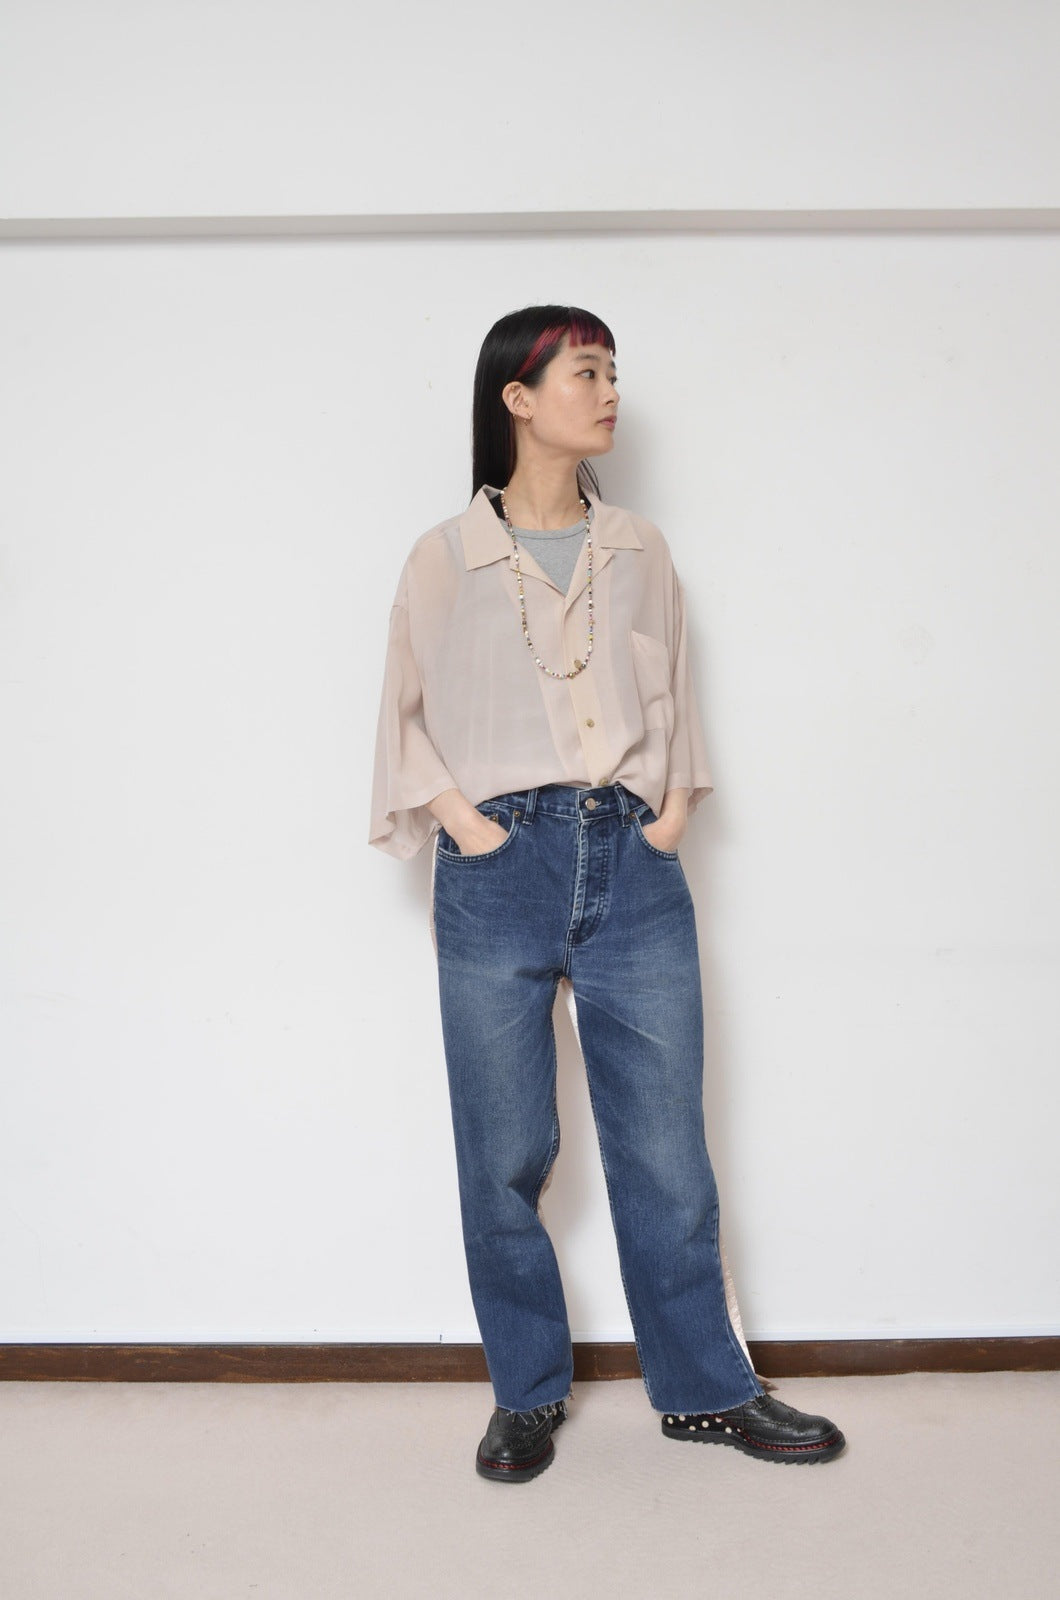 UNION DENIM PT 21SS/002 – here/YEAH RIGHT!!